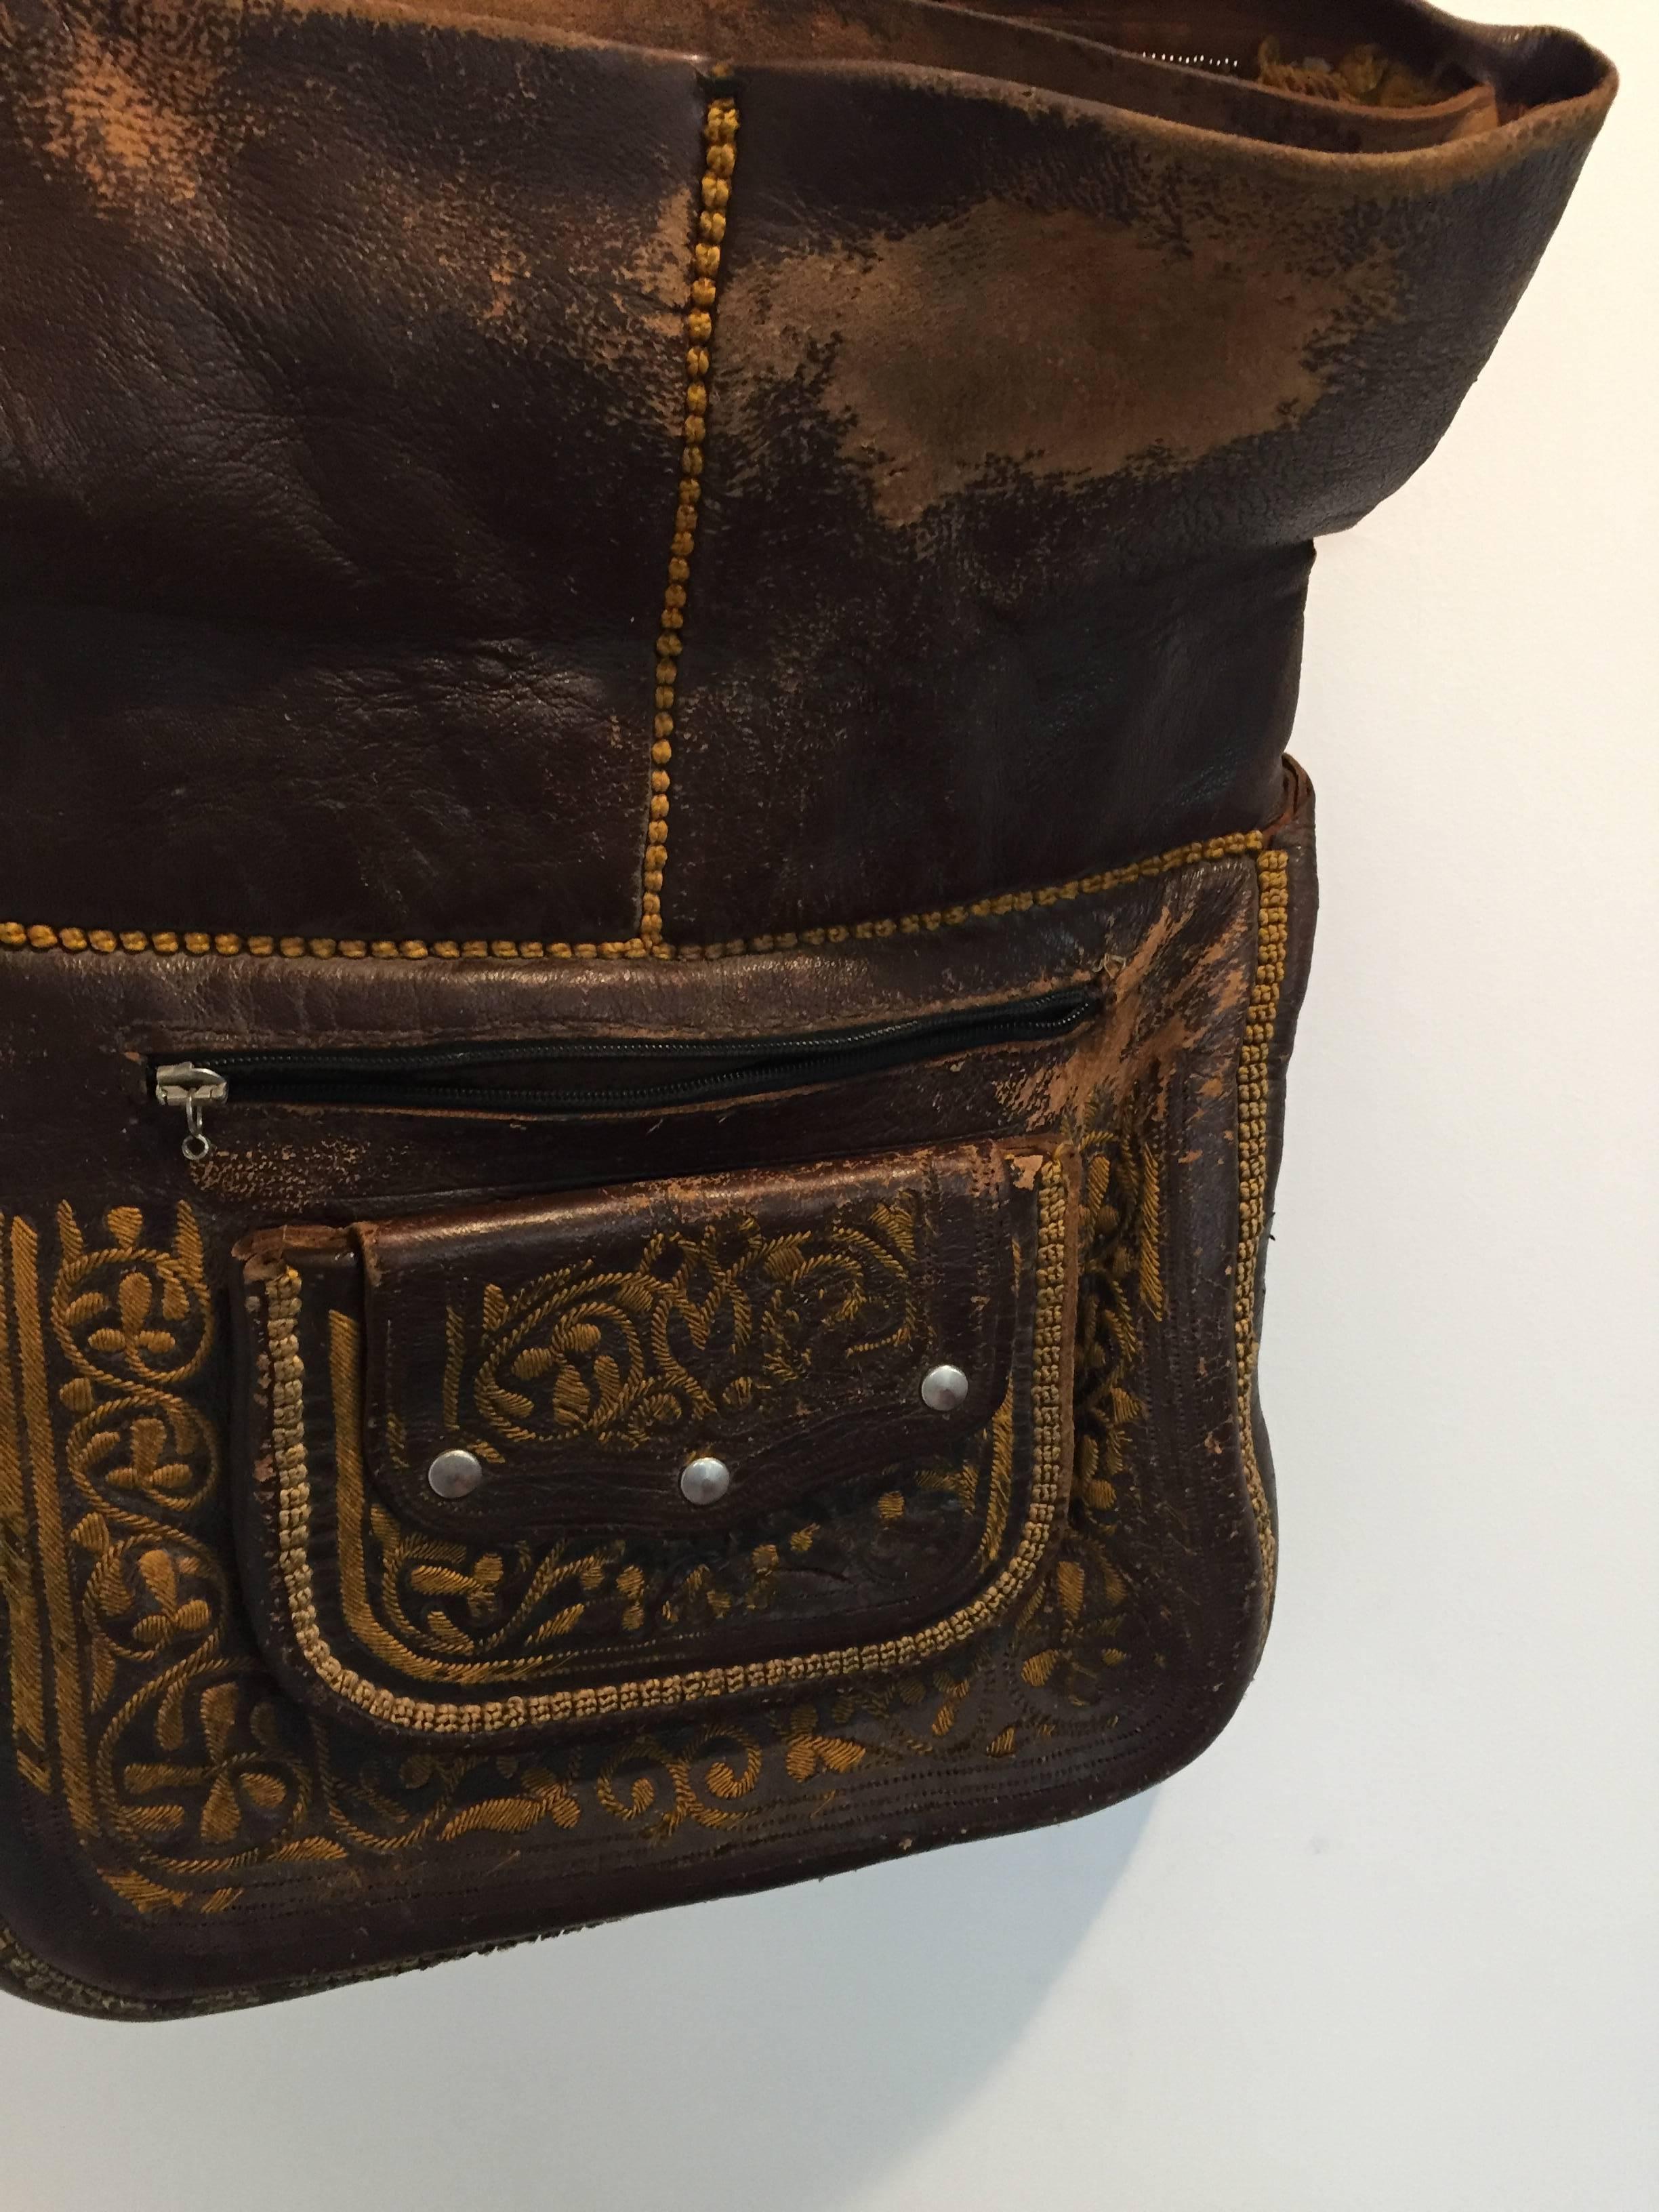 Women's or Men's Old Hand Tooled Leather Moroccan Satchel Bag For Sale